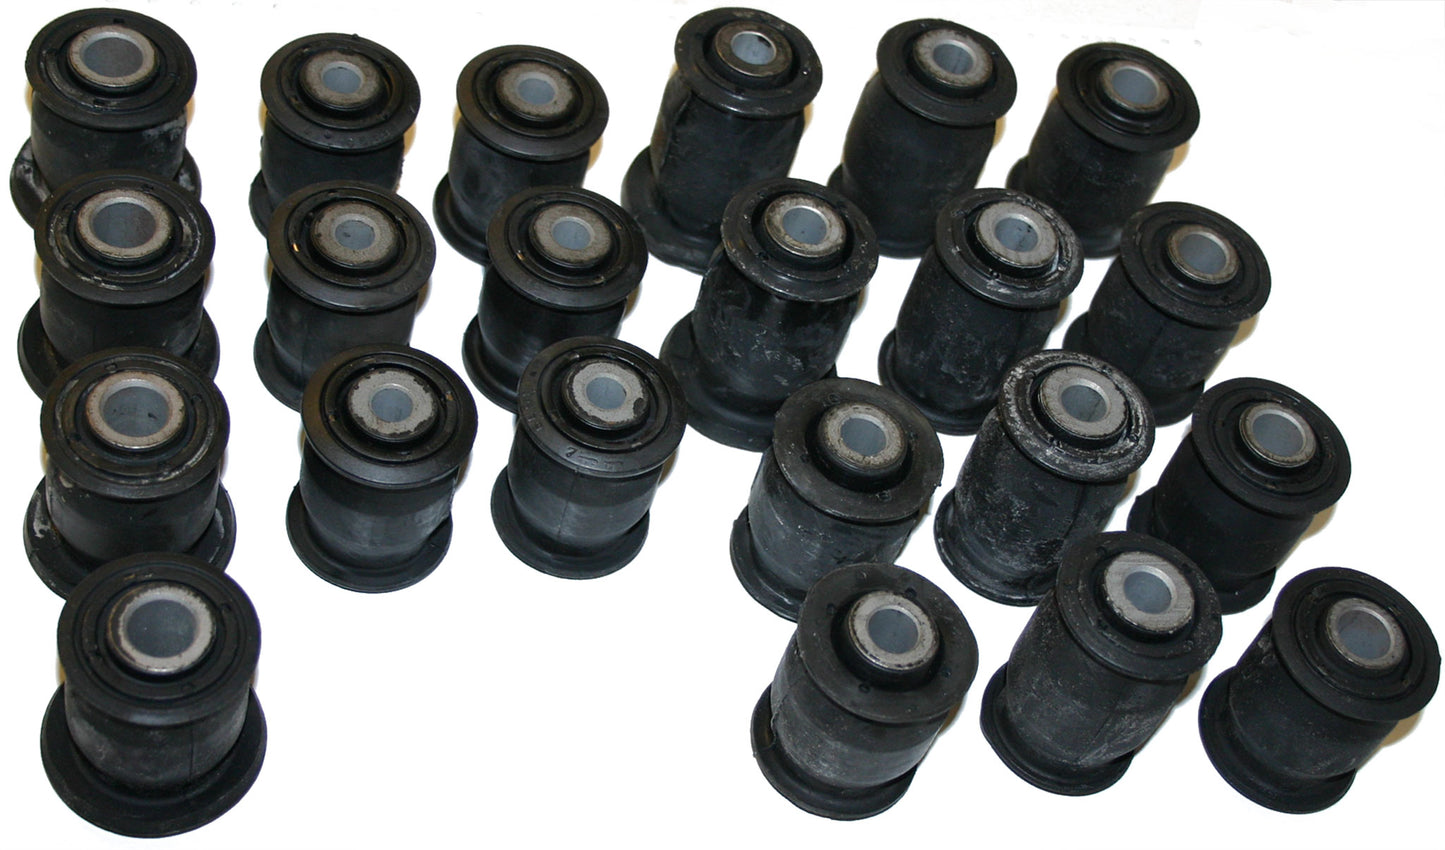 Complete high performance rubber bushing set for NA and NB